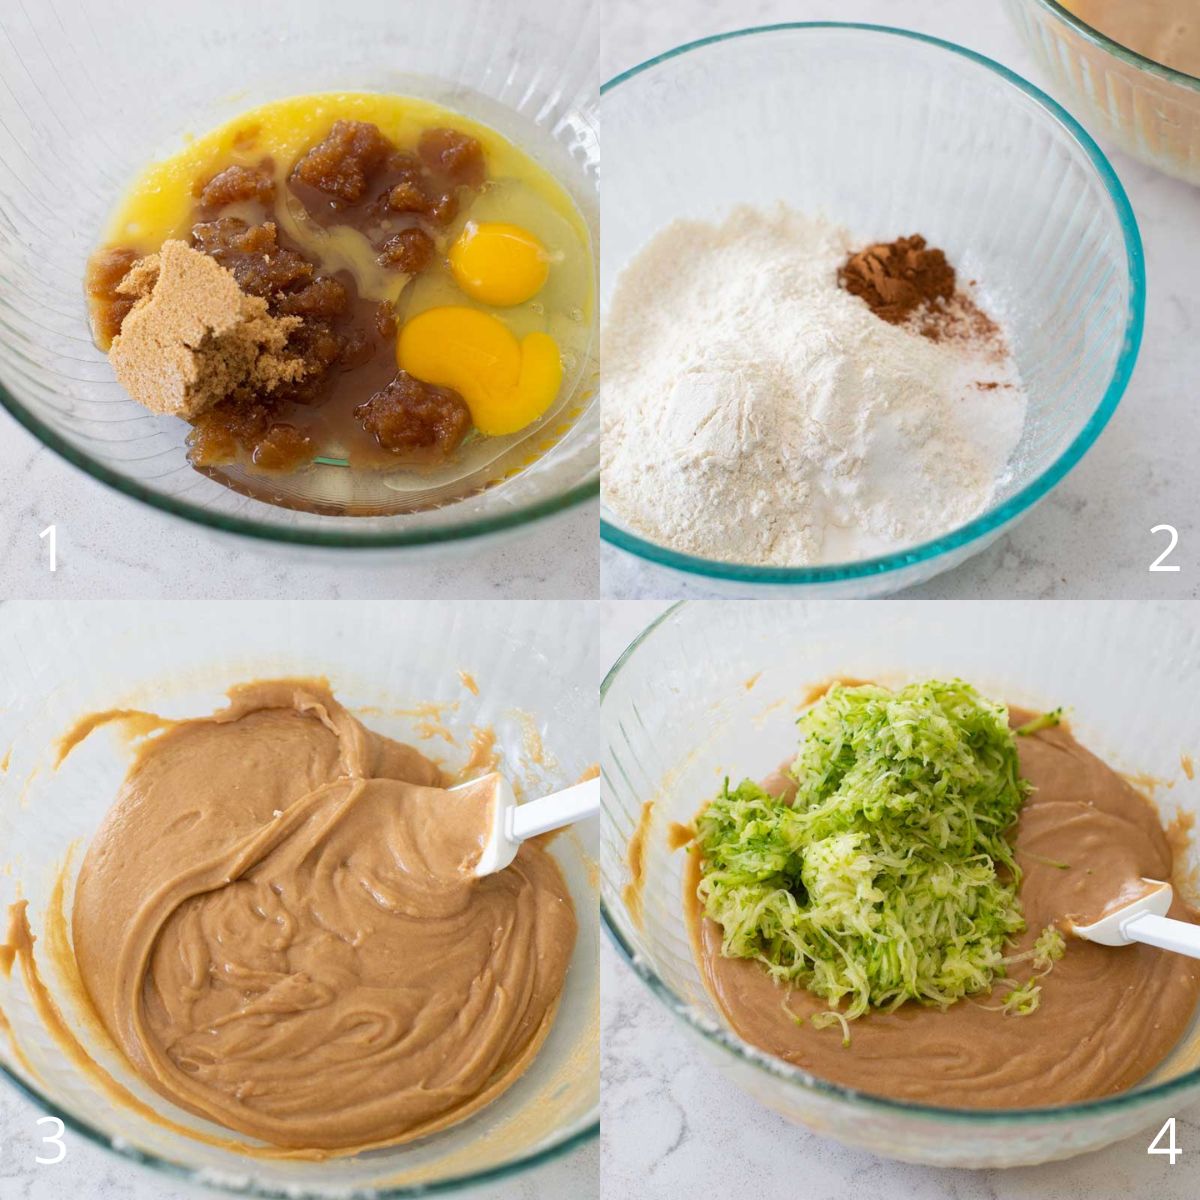 Step by step photos show how to mix the zucchini bread batter.